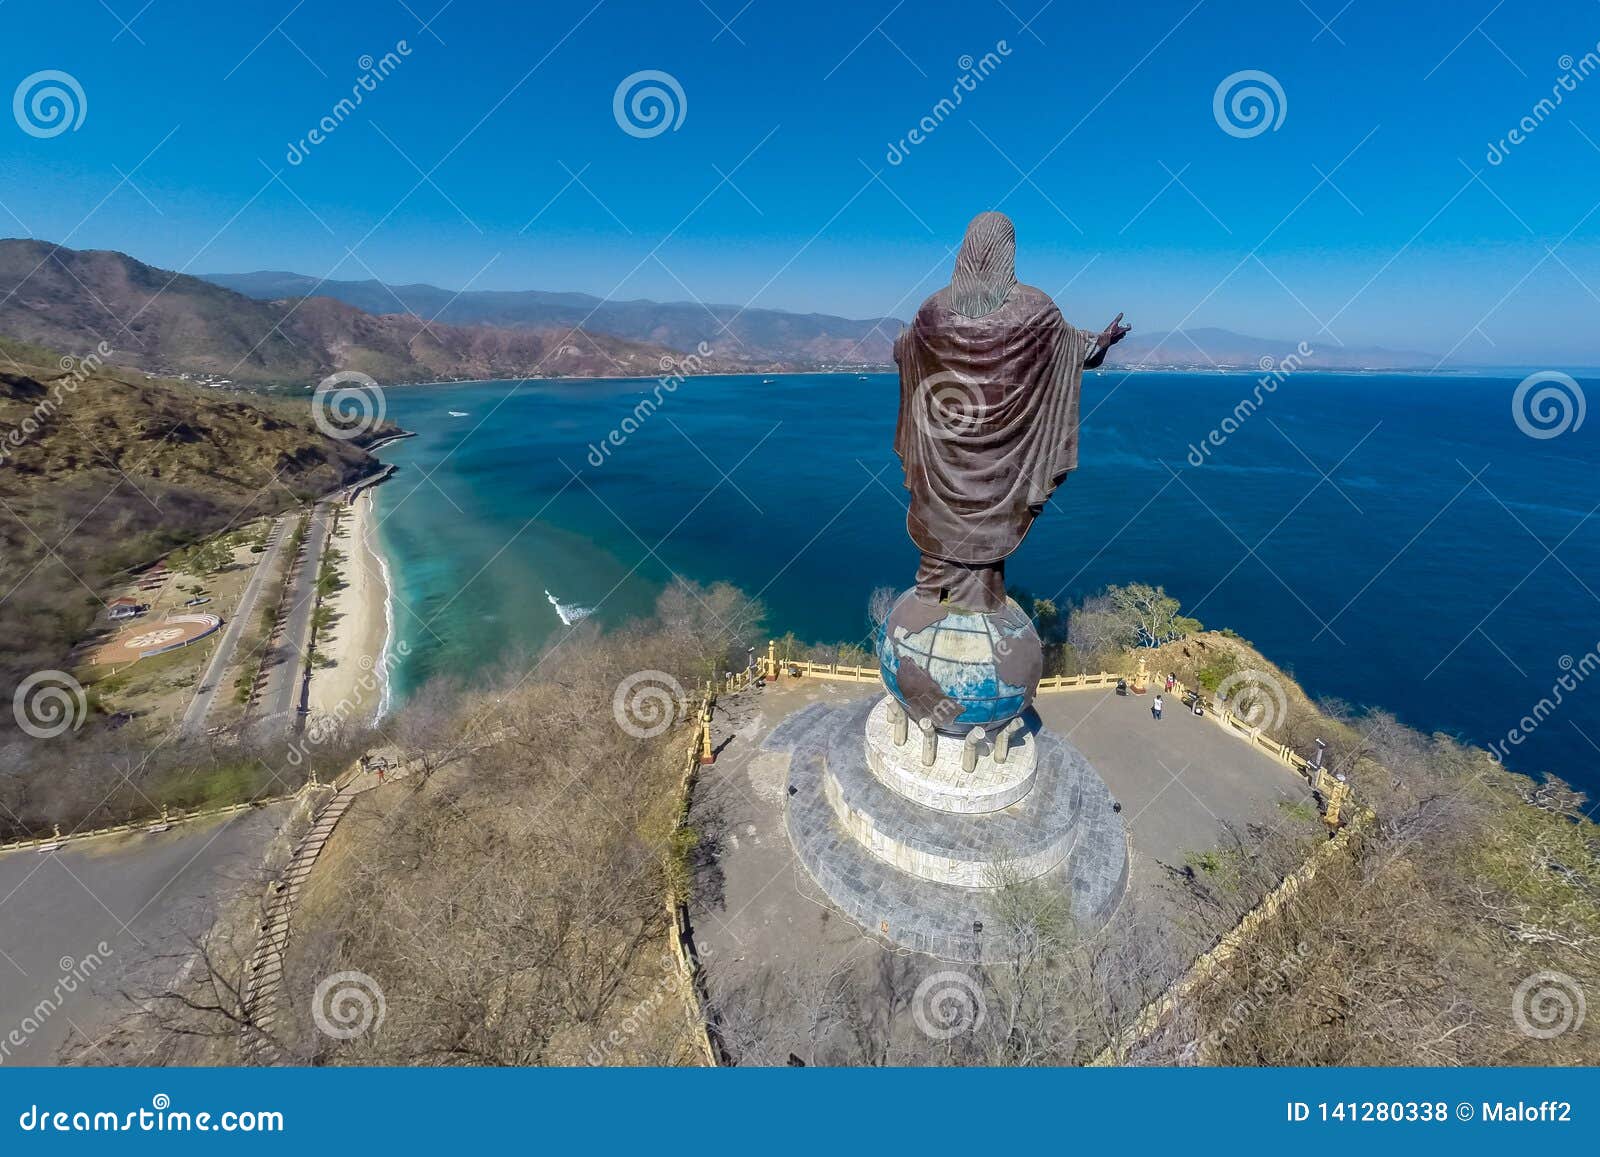 aerial view of cristo rei of dili, high statue of jesus christ located atop a globe in dili city, east timor. timor-leste.